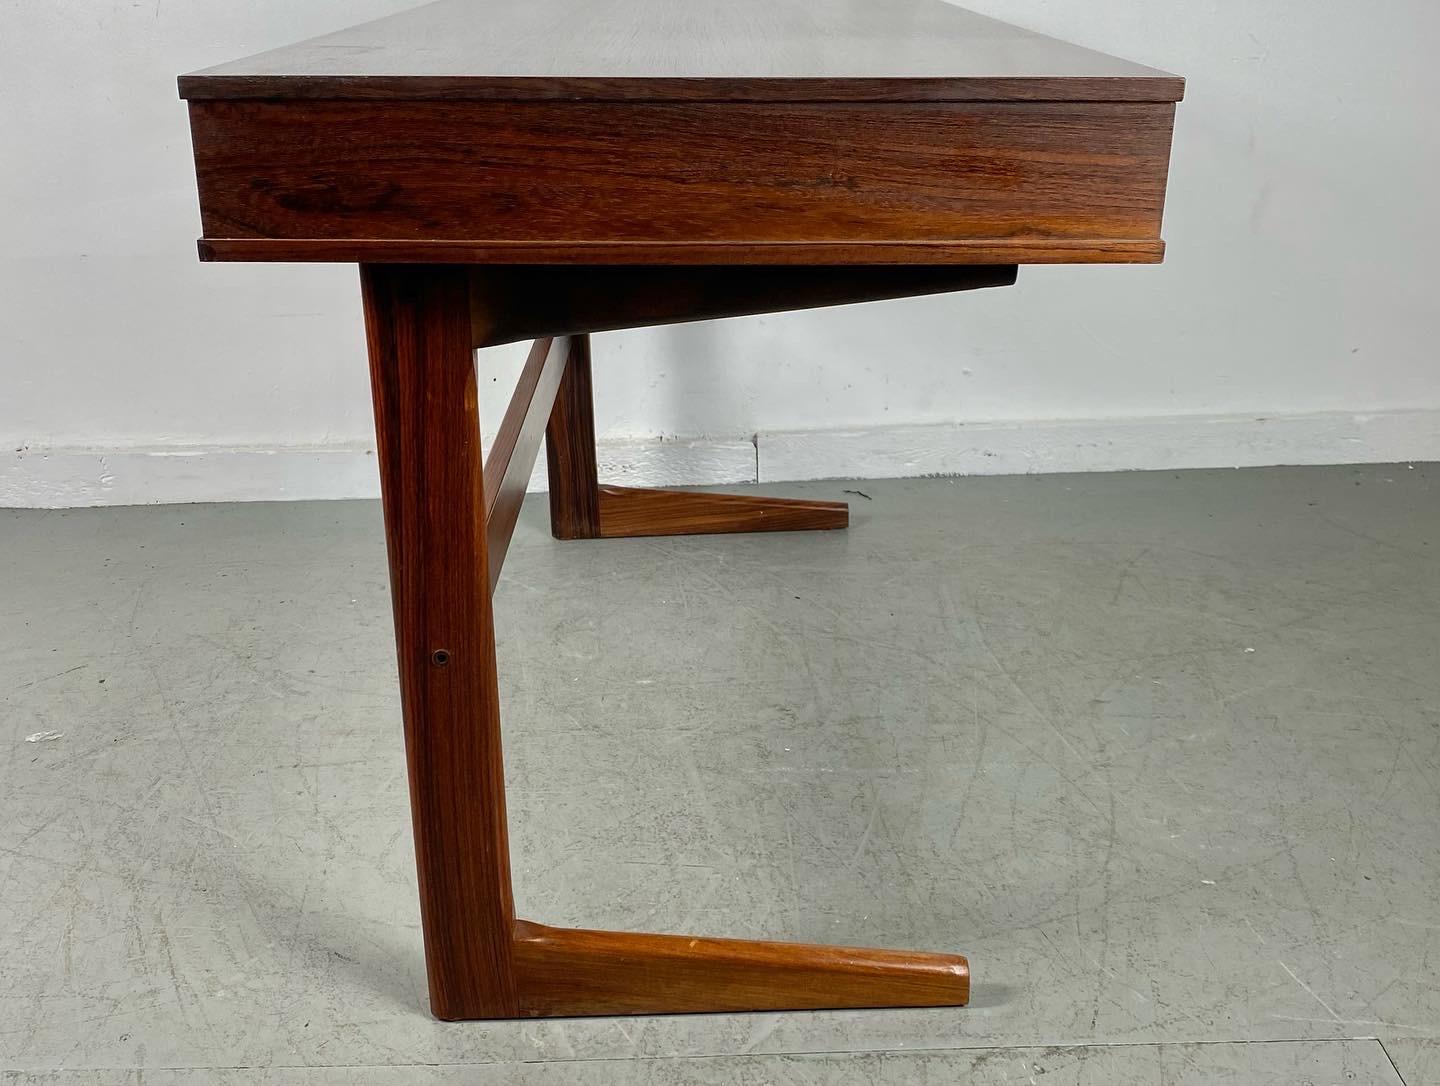 GEORG PETERSENS Danish rosewood Cantilever desk. Modern Minimalist form 3 drawer cabinet supported by cantilever legs with back stretcher. Made in Denmark.-Richly grained rosewood,,- Wonderful original condition,, Hand delivery avail to New York